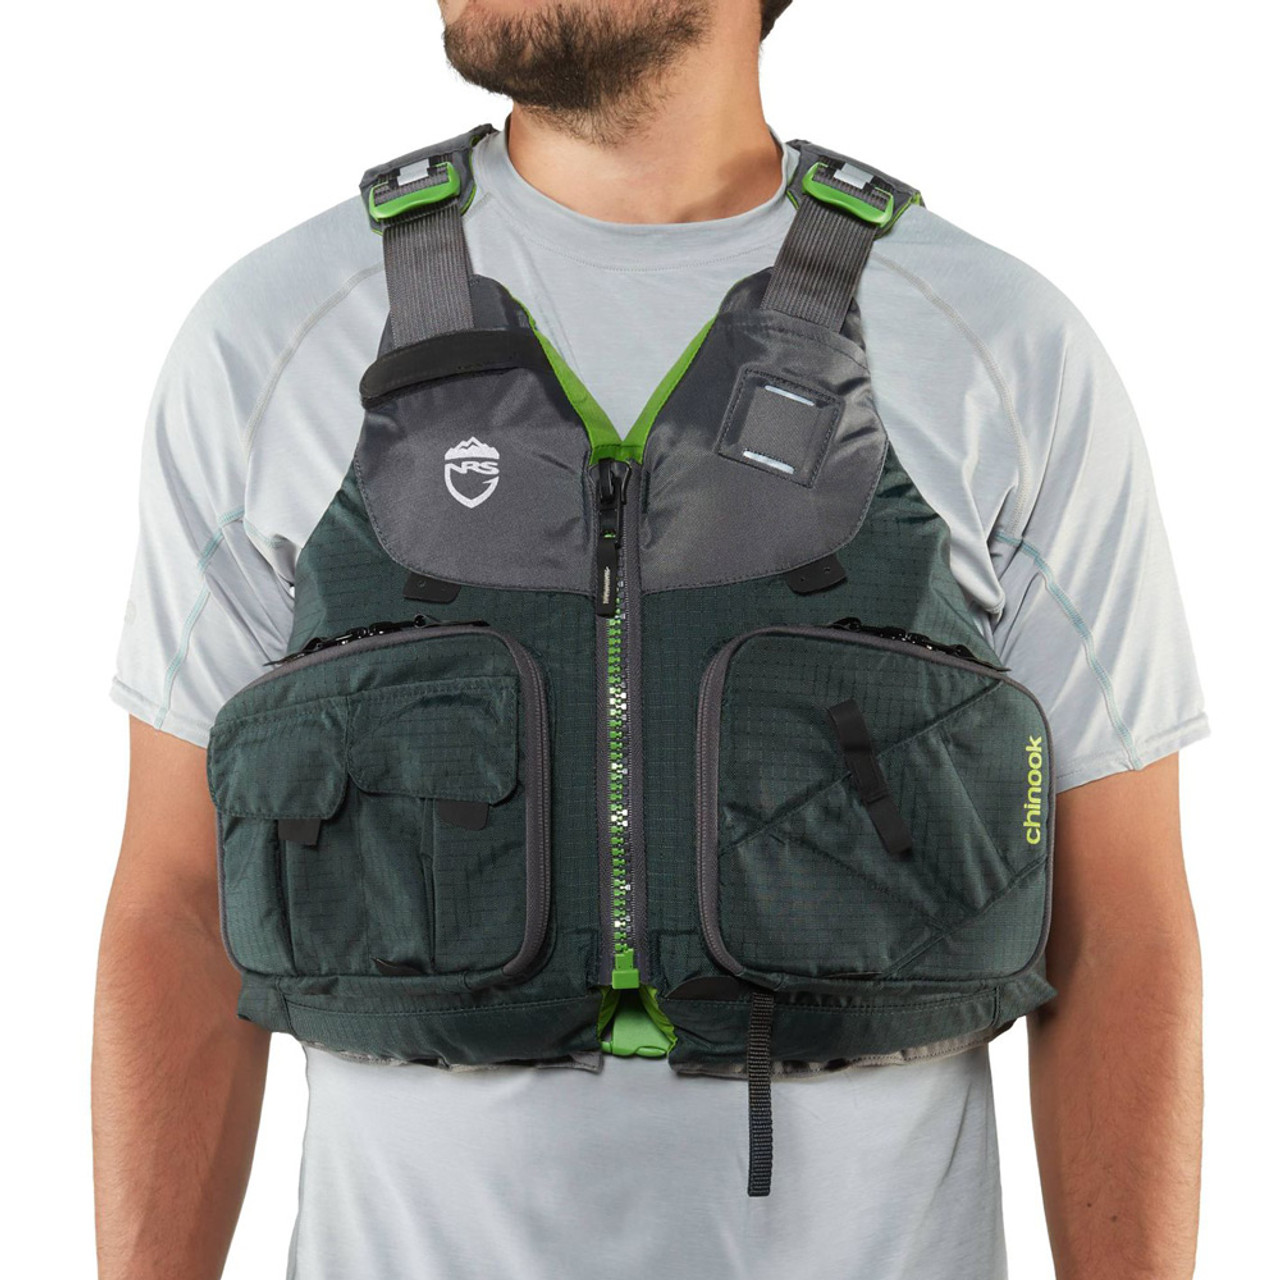 NRS Chinook Fishing PFD - Charcoal - SPECIAL OFFER